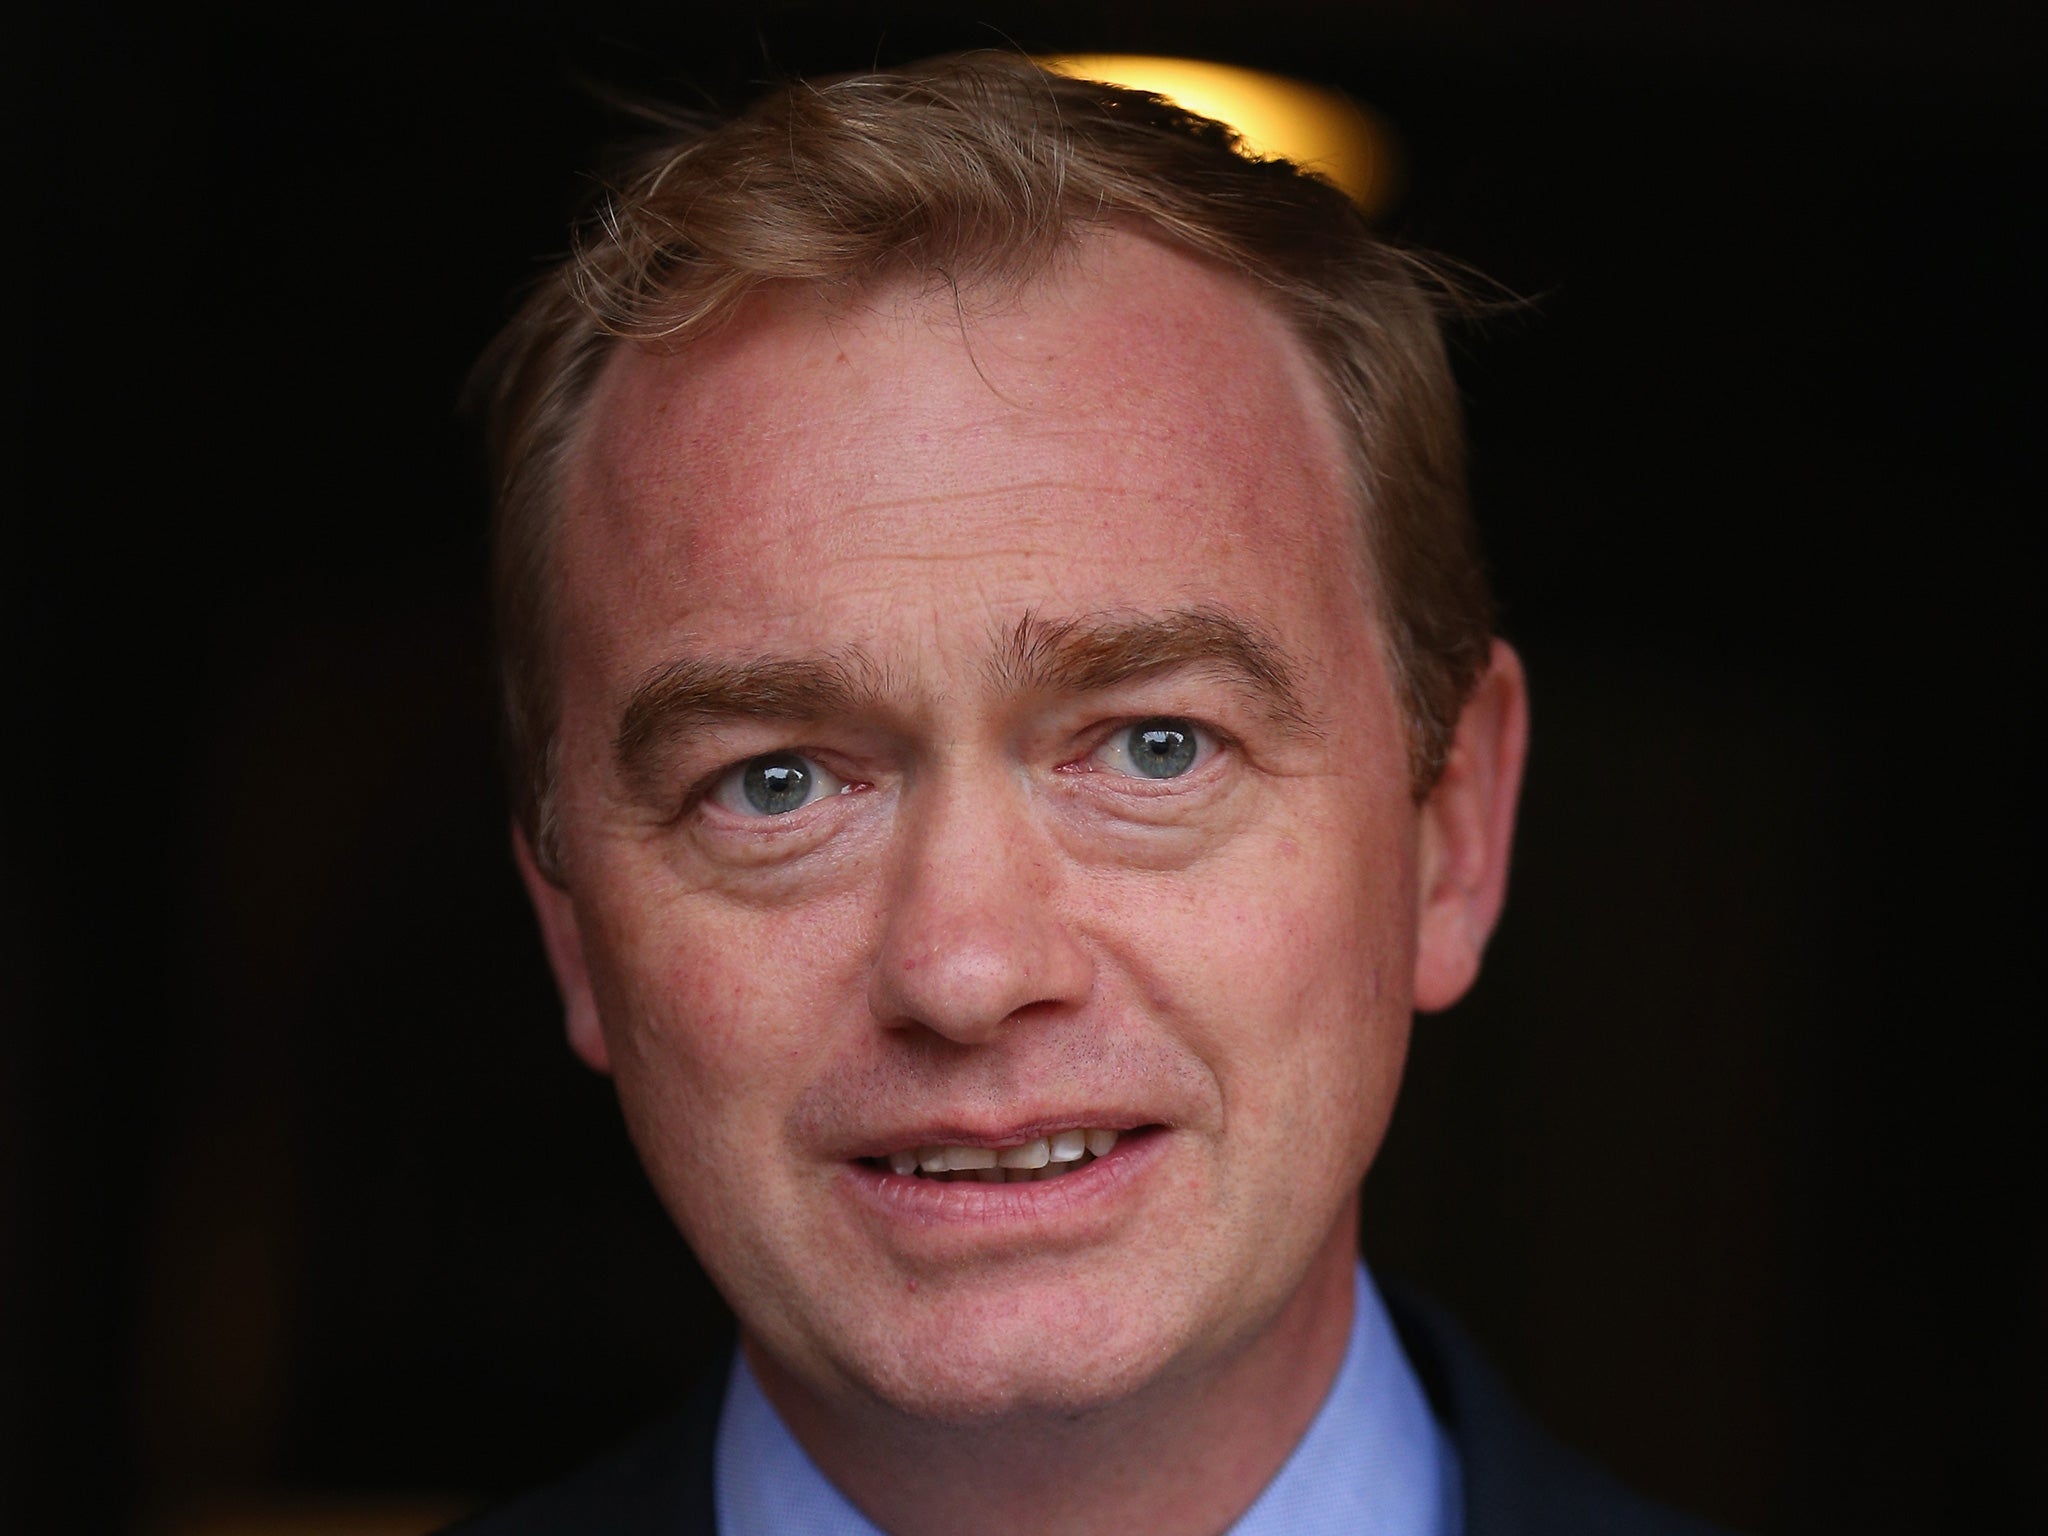 Tim Farron’s Private Member’s Bill would commit the UK to allow in unaccompanied refugee children